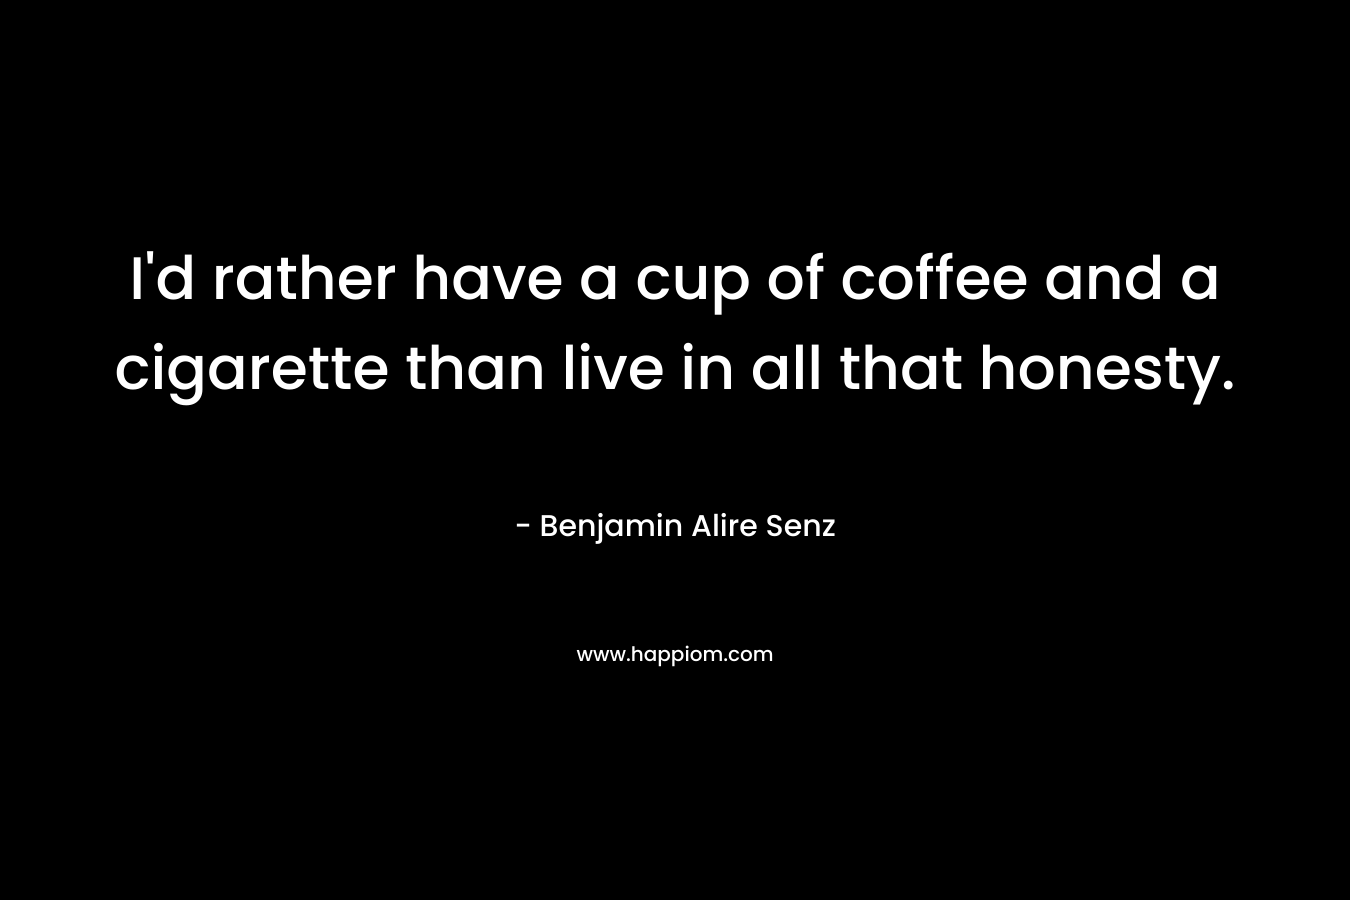 I’d rather have a cup of coffee and a cigarette than live in all that honesty. – Benjamin Alire Senz